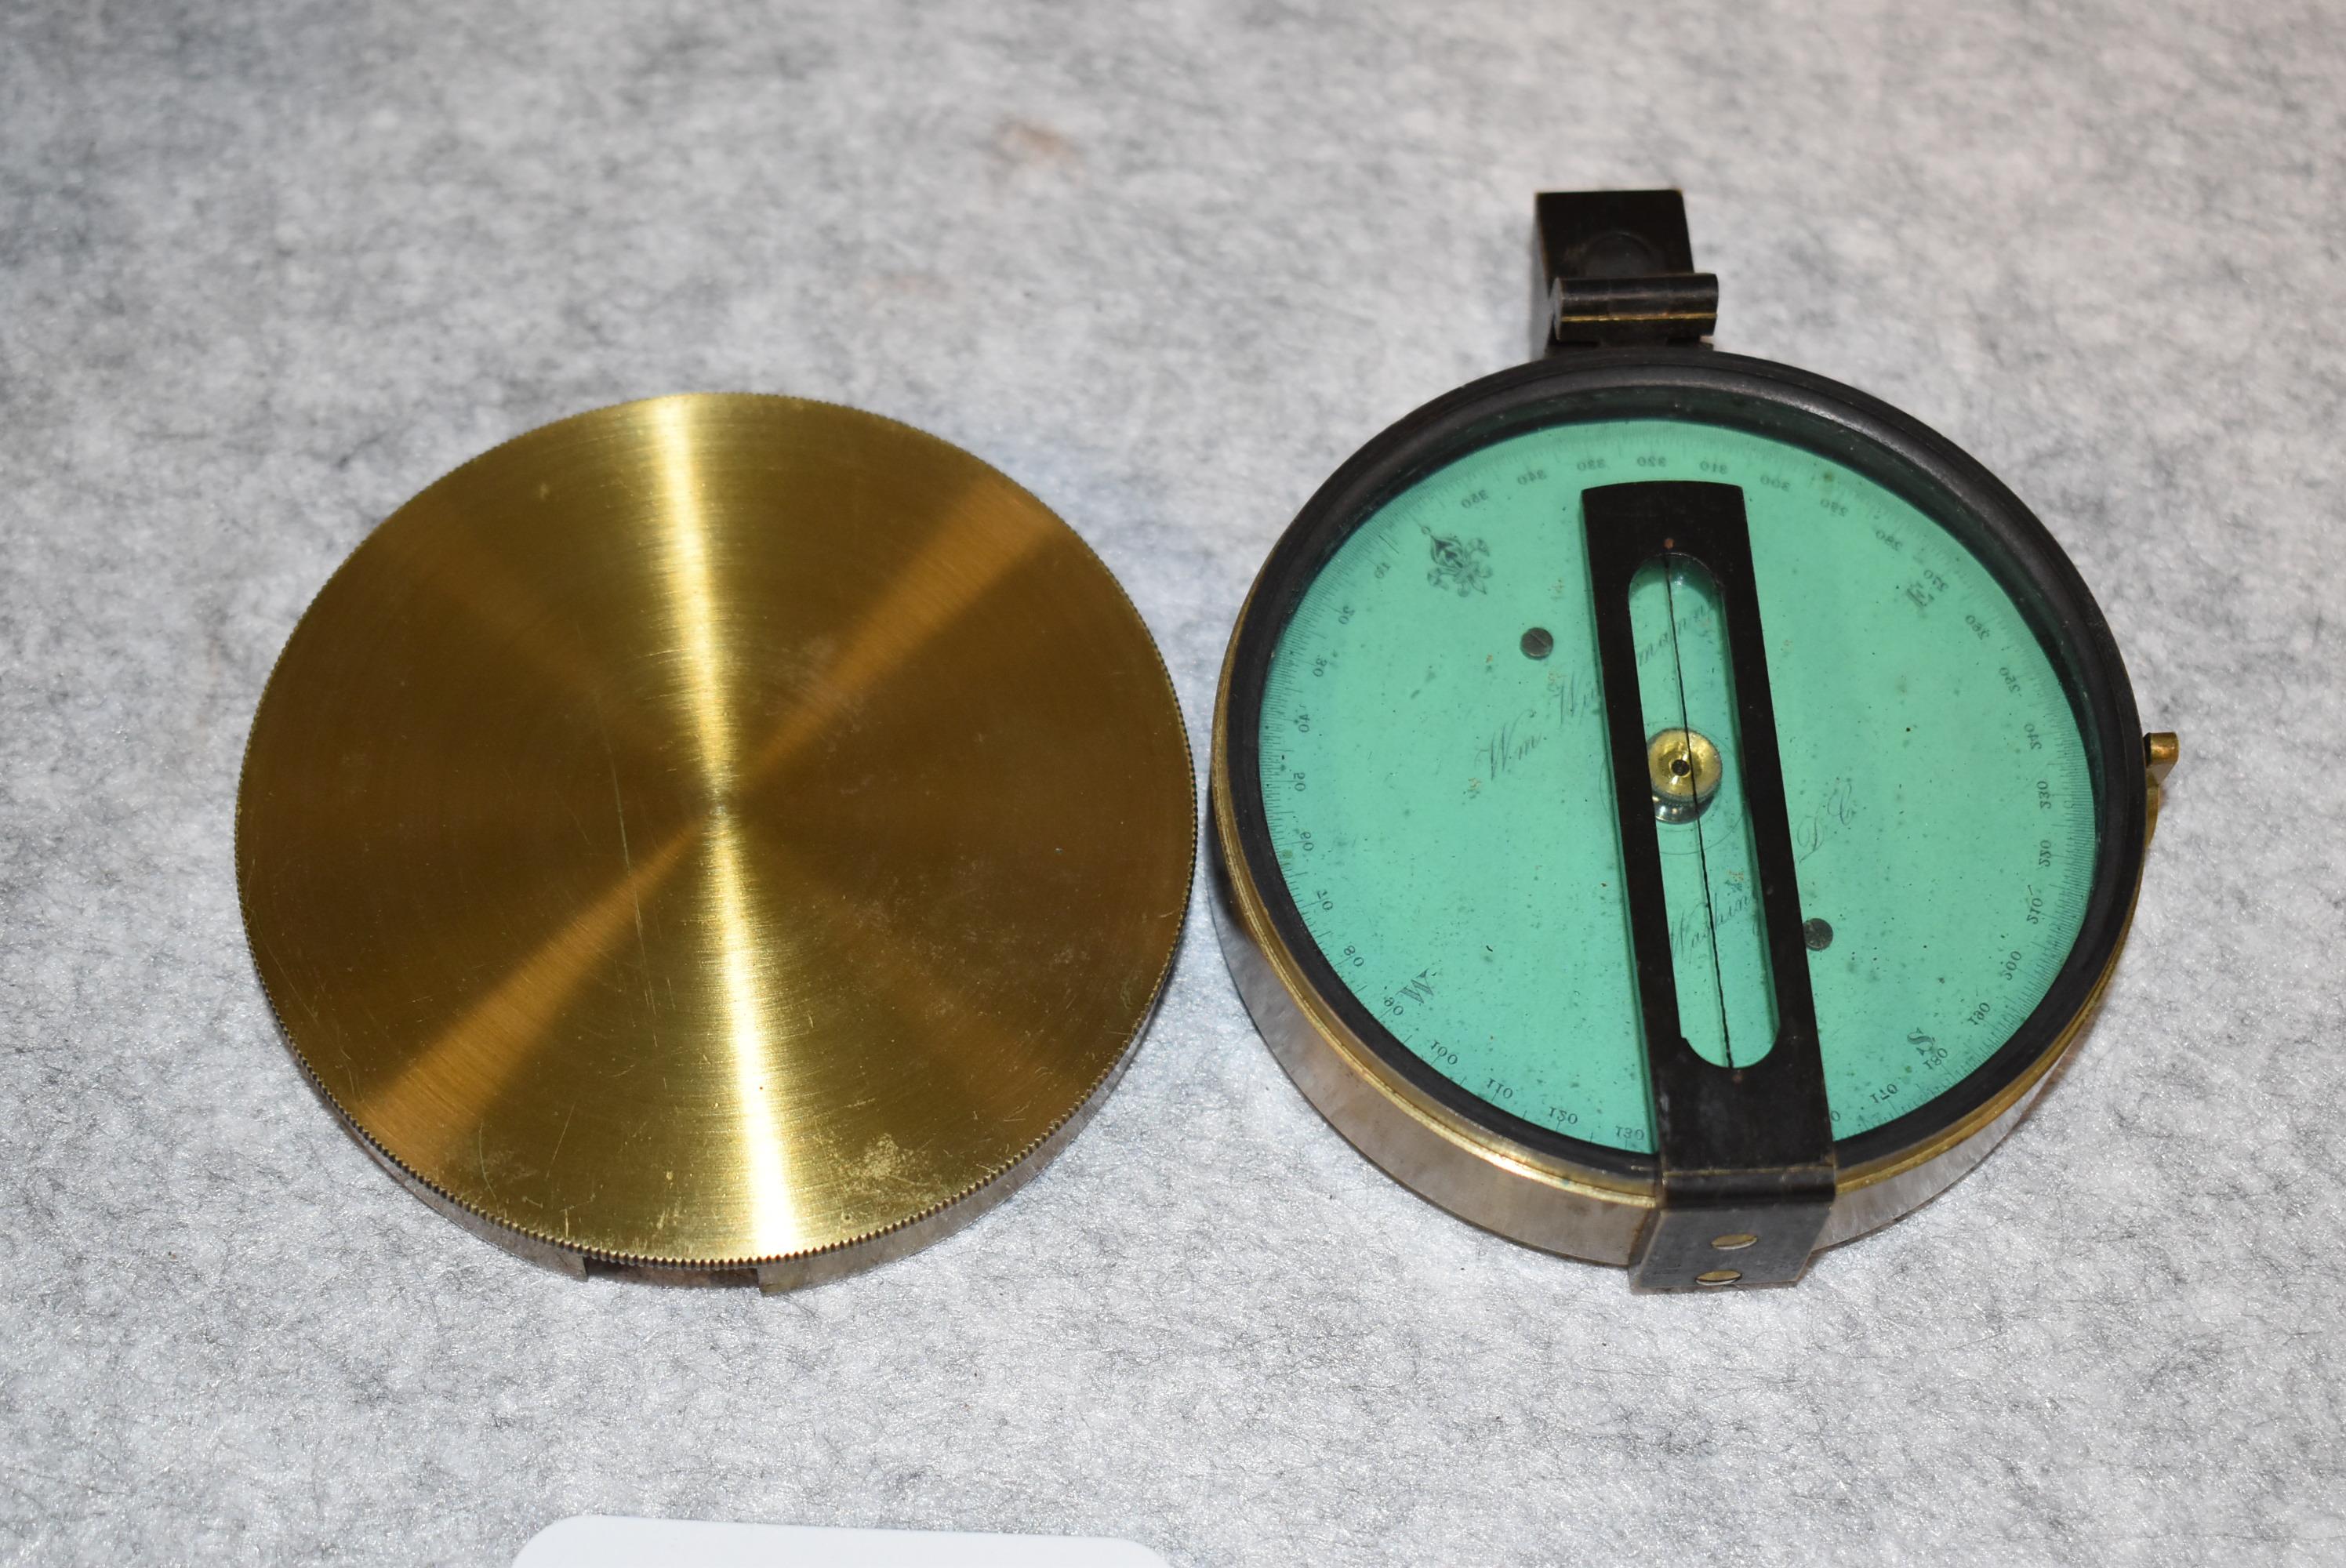 Brass compass in leather carrying case